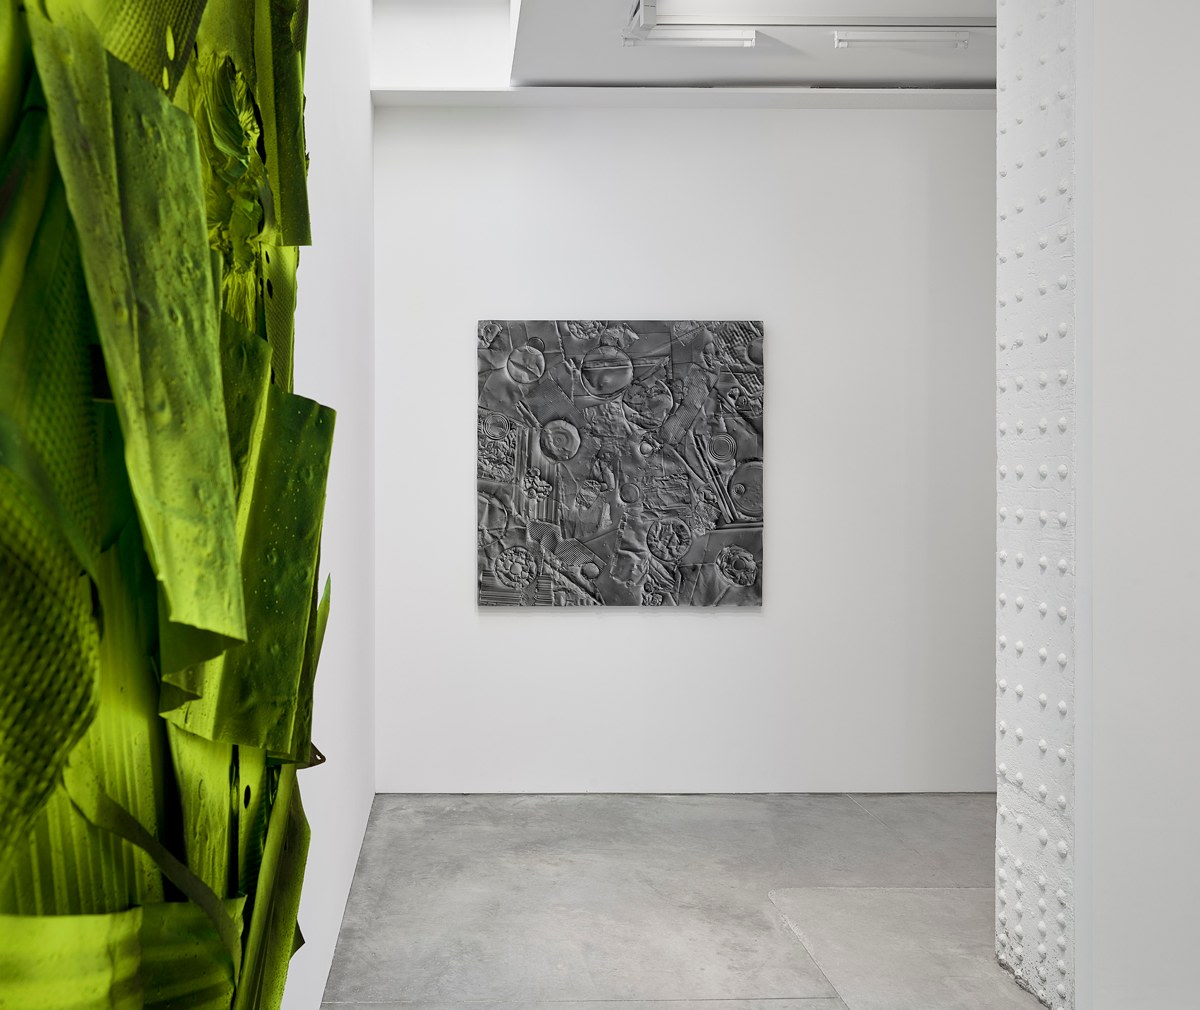 Installation view William Monaghan, Environmental Studies, Octavia Gallery, 2019_Andy Romer Photography